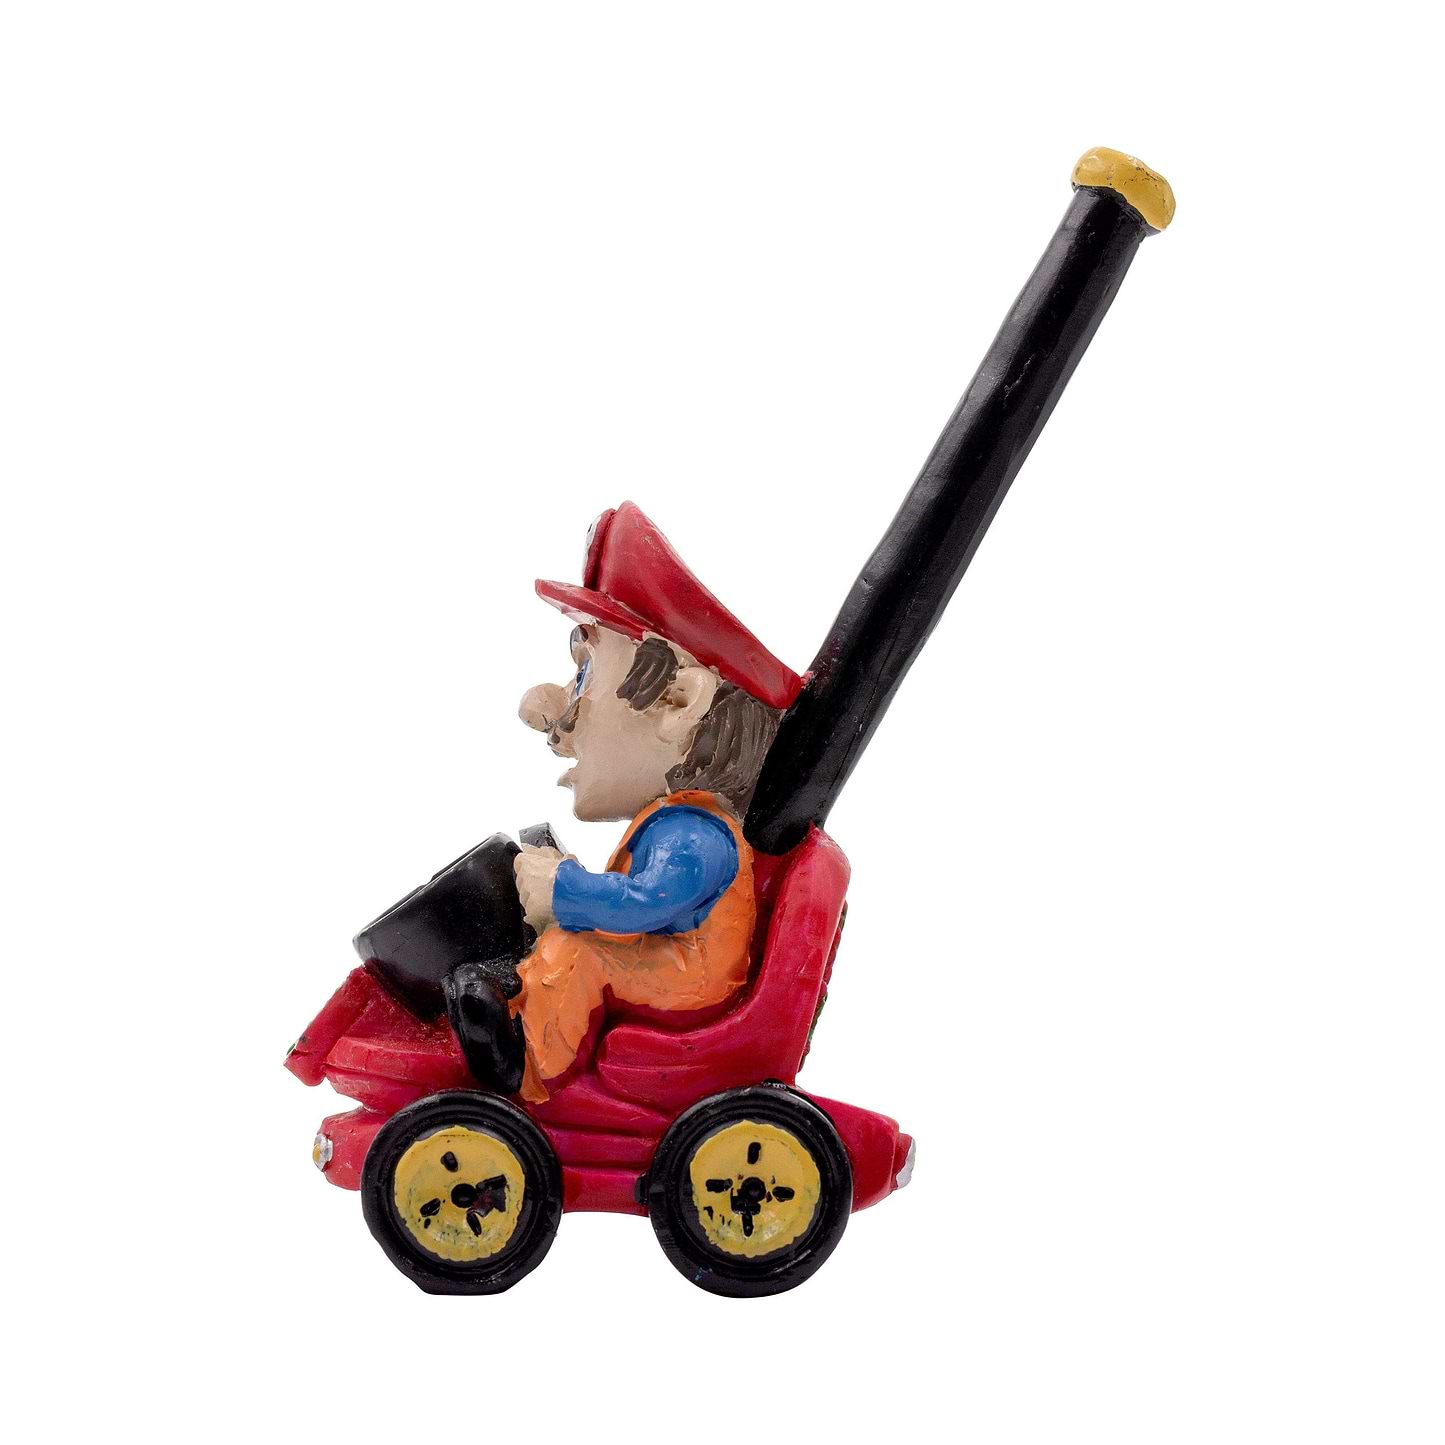 Cool hand-painted clay pipe smoking device figurine-like in mario on cart design